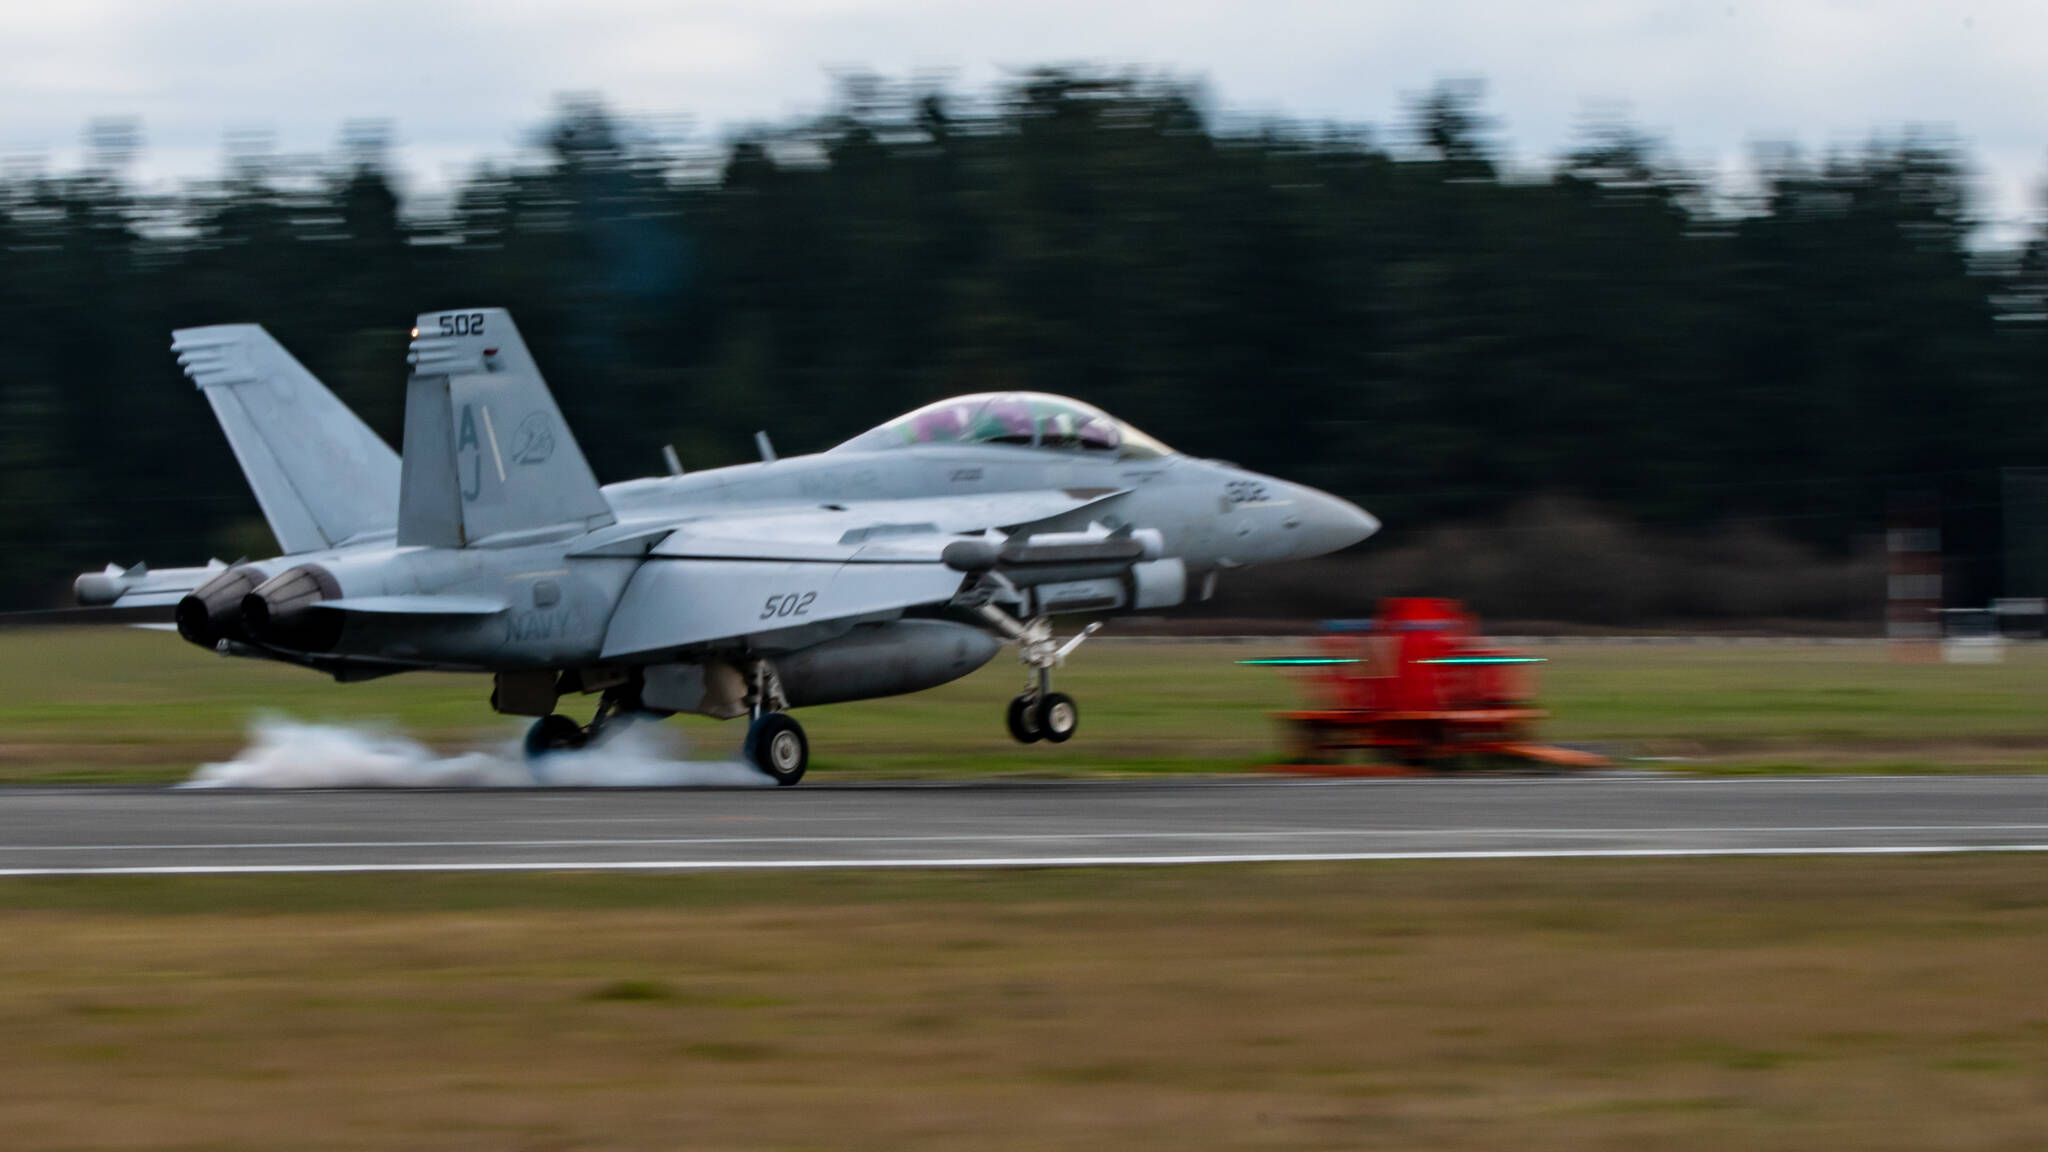 An EA18-G Growler practices at Outlying Field Coupeville. (AvgeekJoe Productions)
An EA18-G Growler touches down and burns some rubber during practice at Outlying Field Coupeville. (AvgeekJoe Productions)